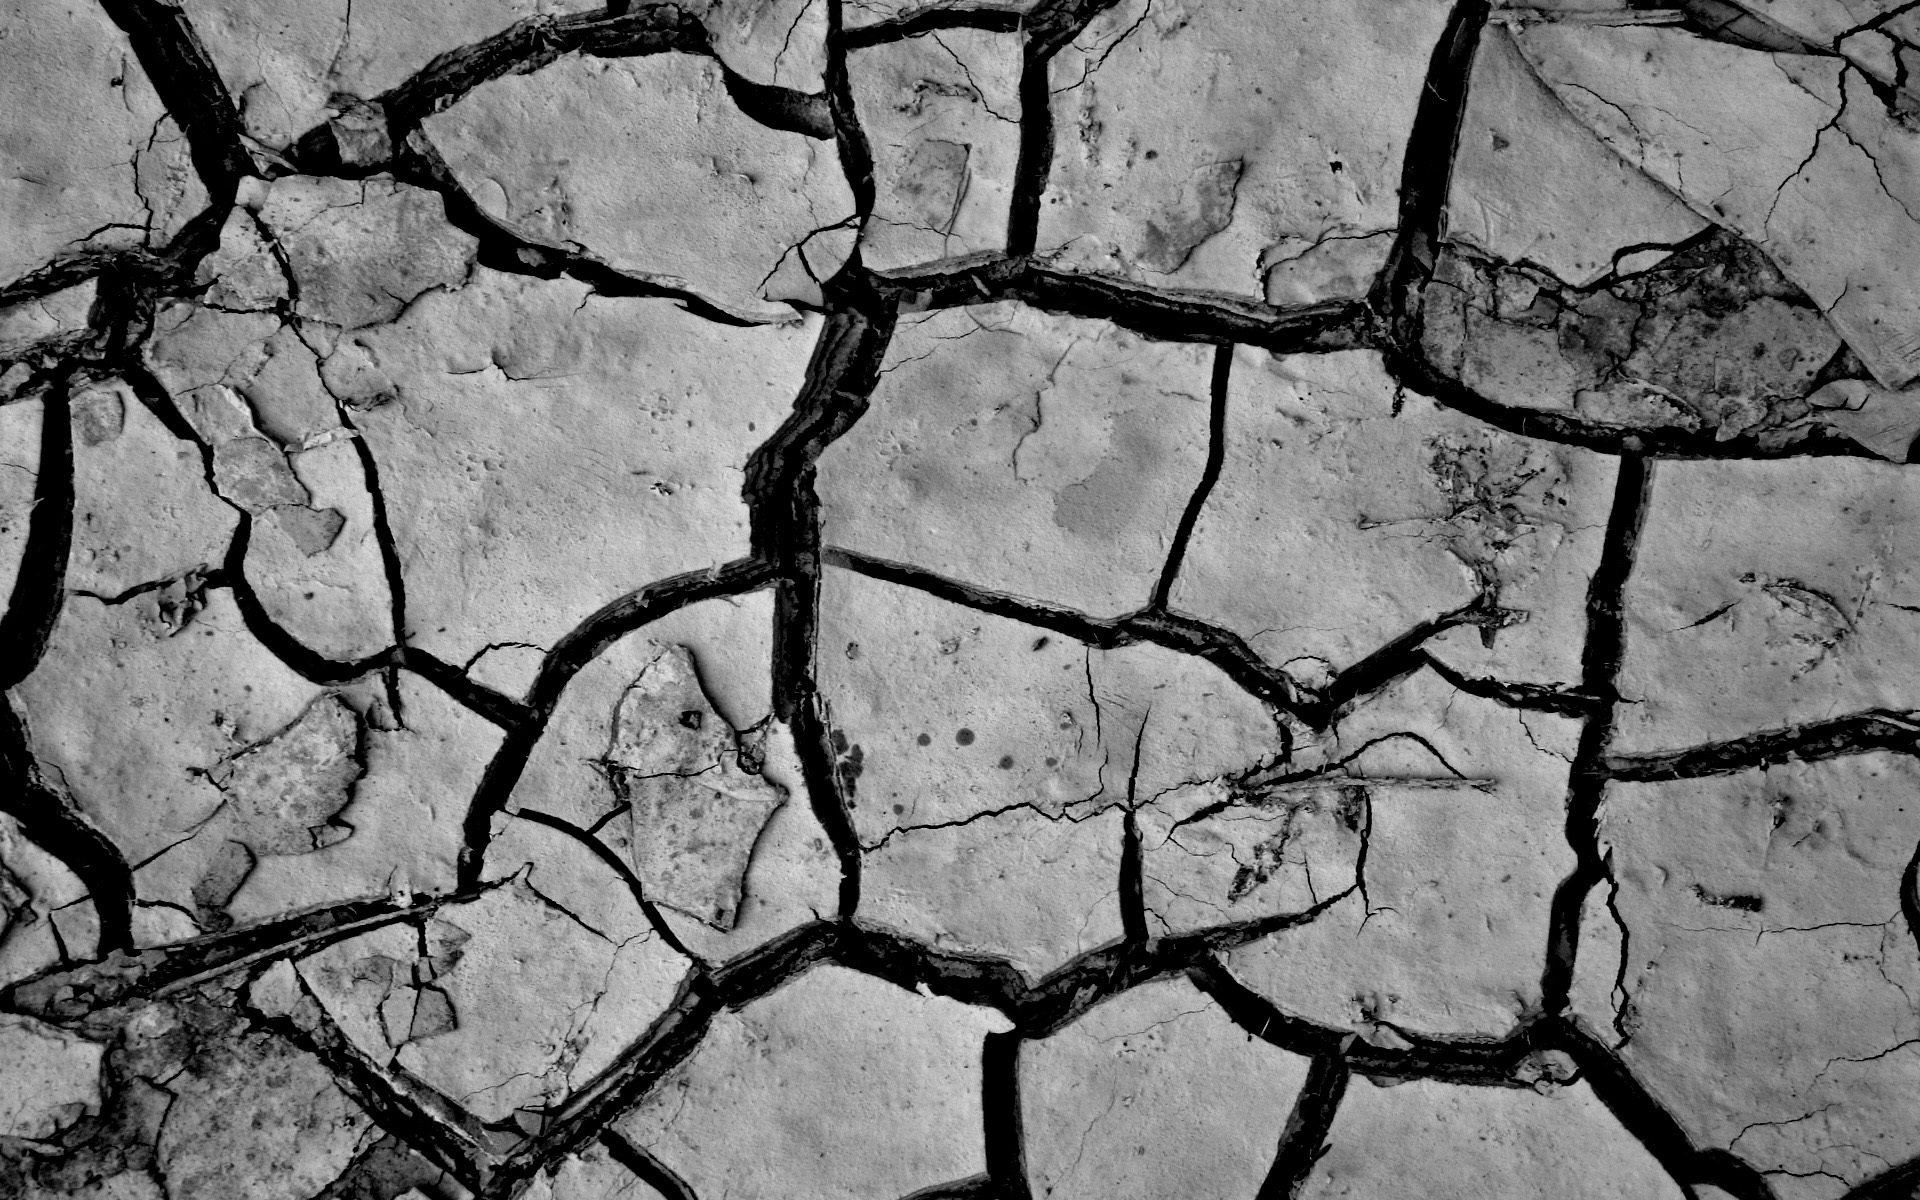 cracked ground earth, stone, texture, background, download background, image